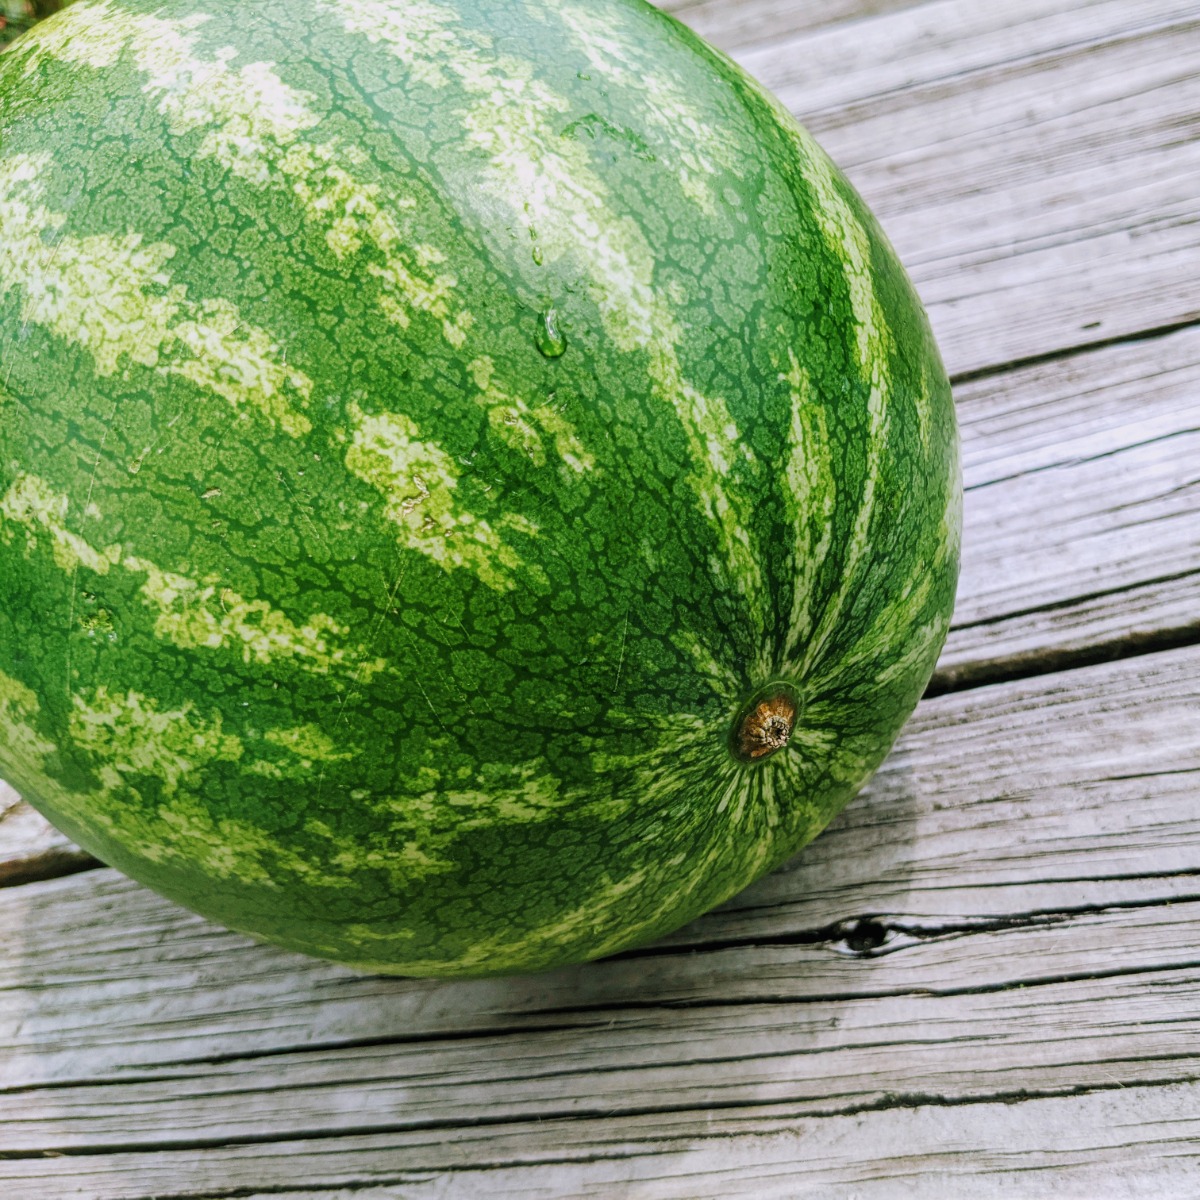 Watermelon on wooden deck - Find out when to harvest watermelon with these tricks